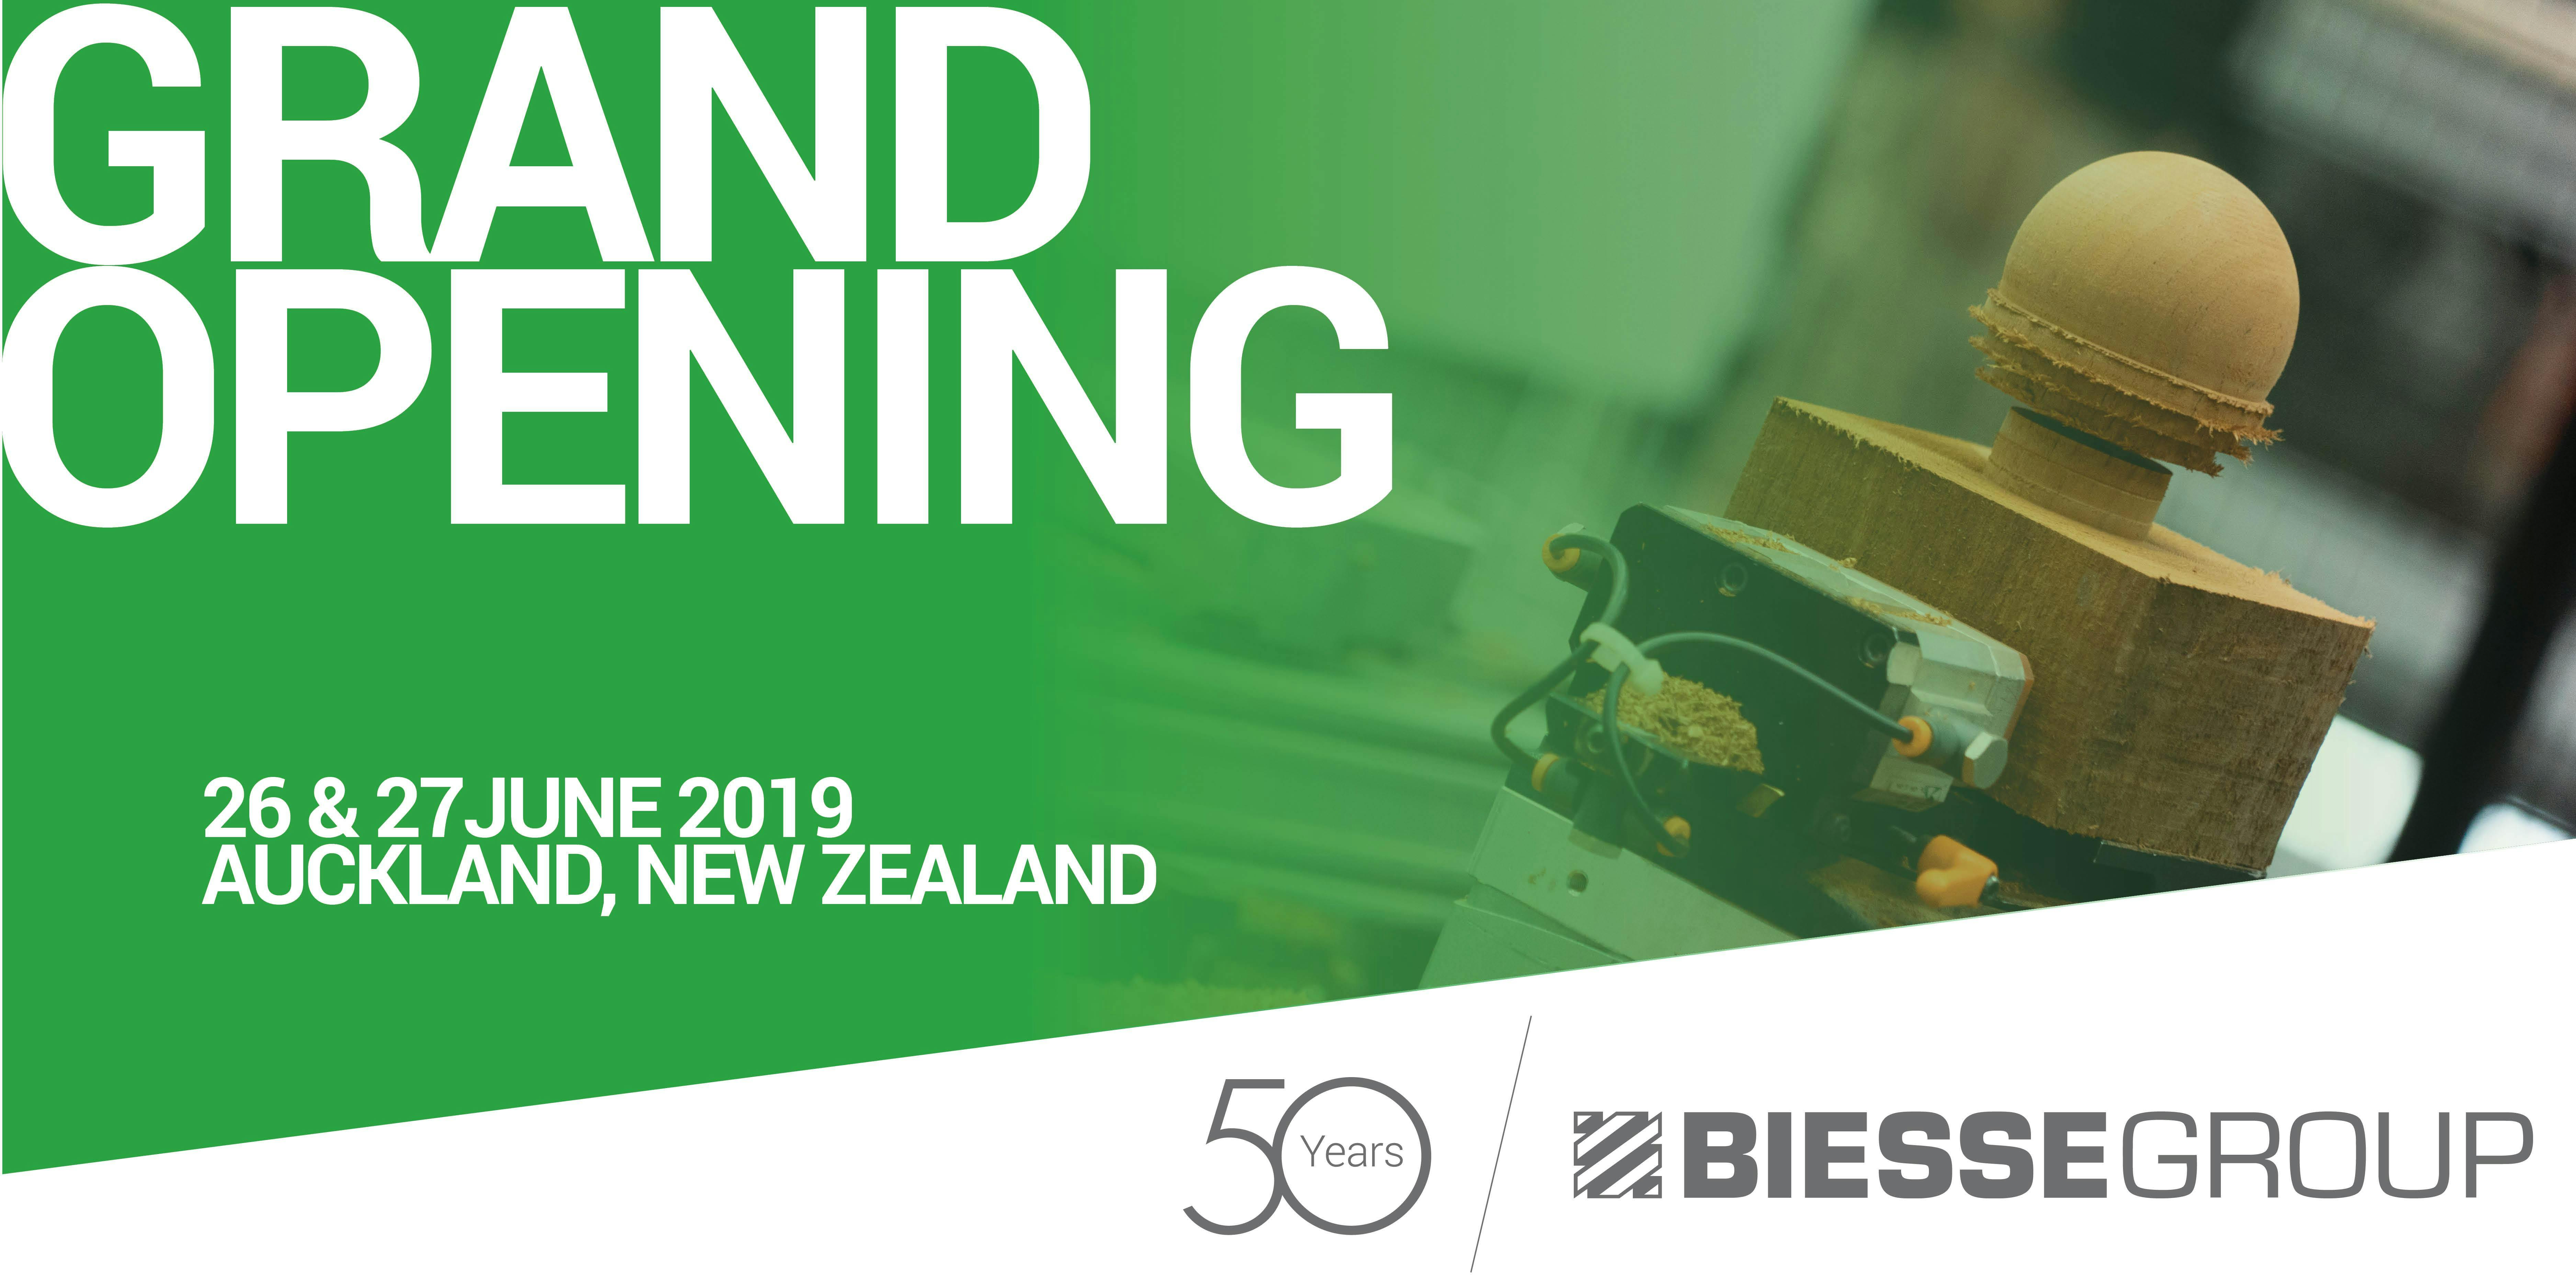 Biesse Auckland Campus Grand Opening